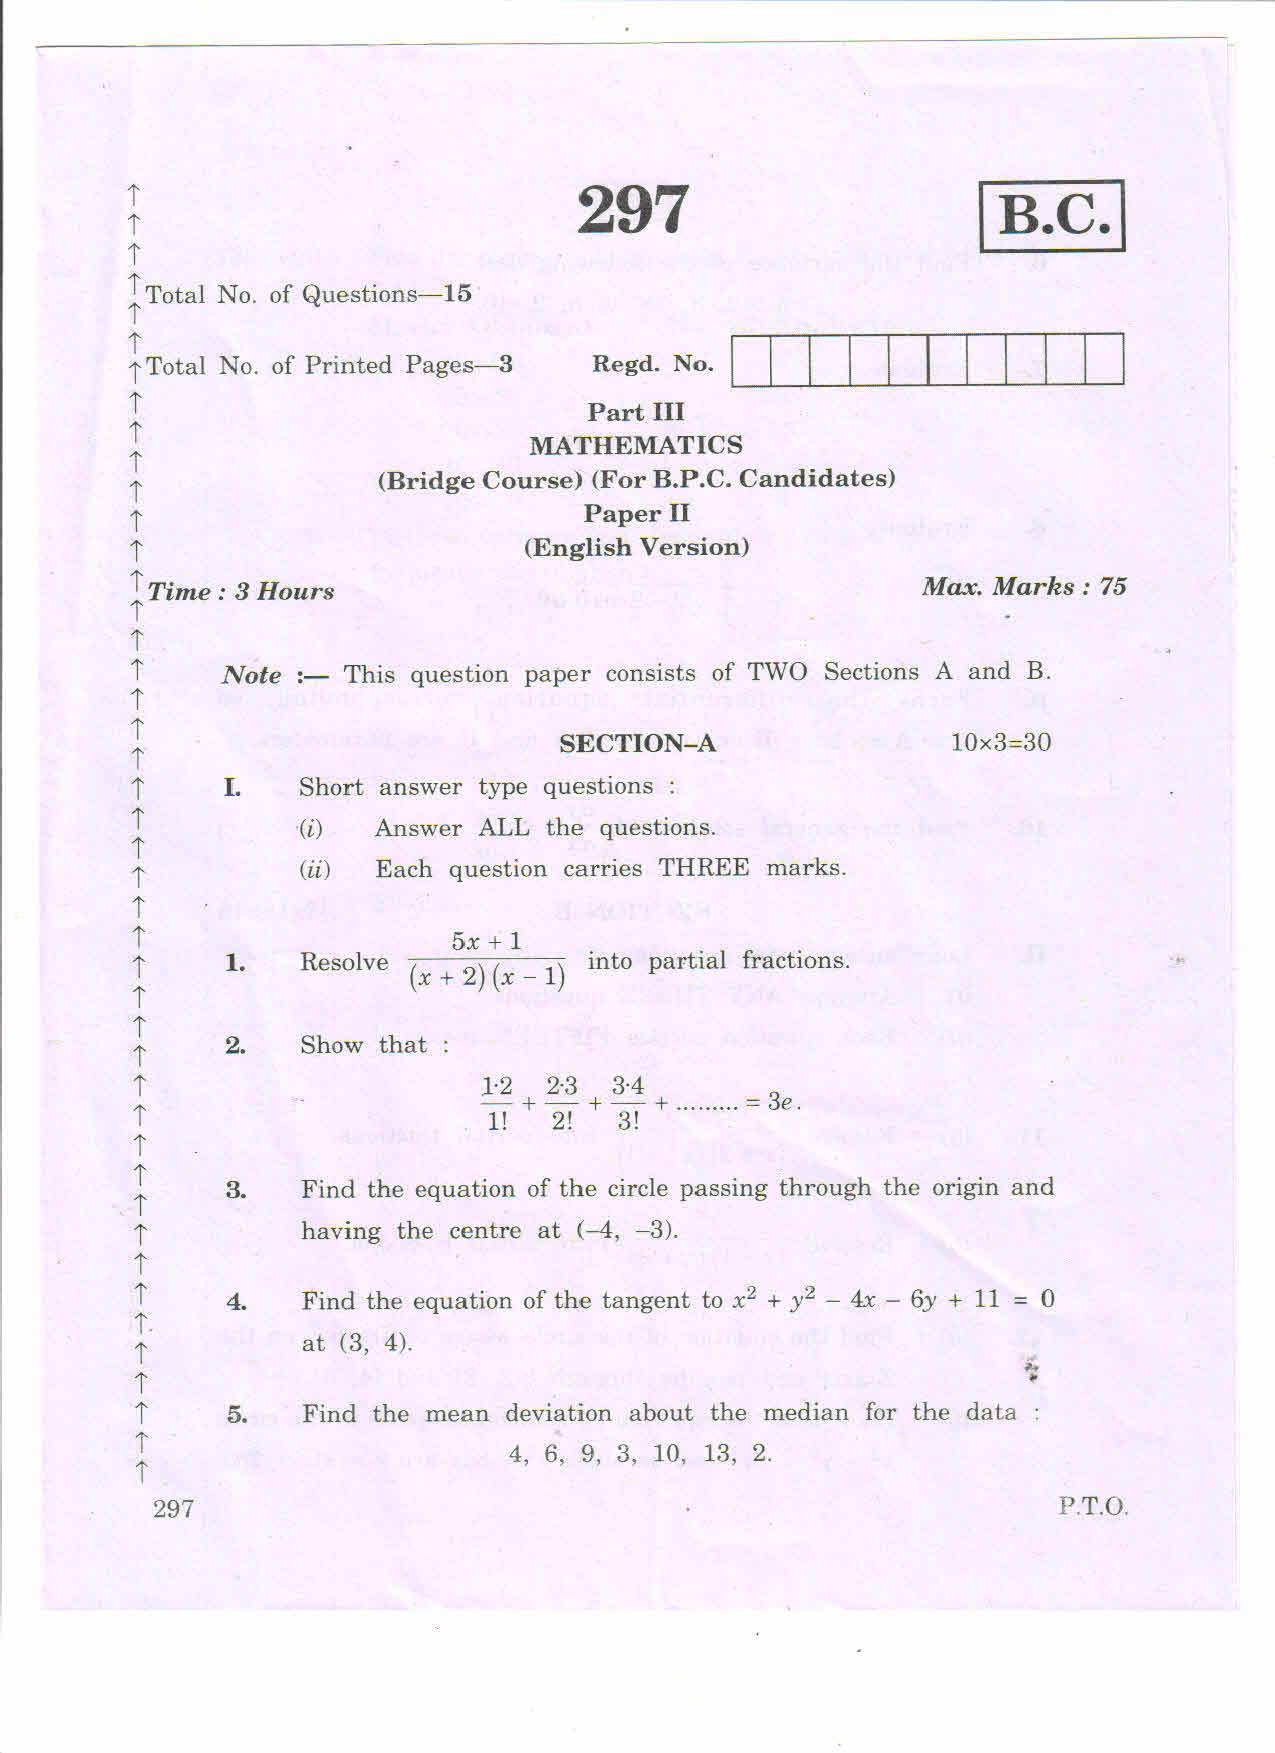 AP 2nd Year General Question Paper March - 2020 - BRIDGE COURSE MATHS-II (EM) - Page 1